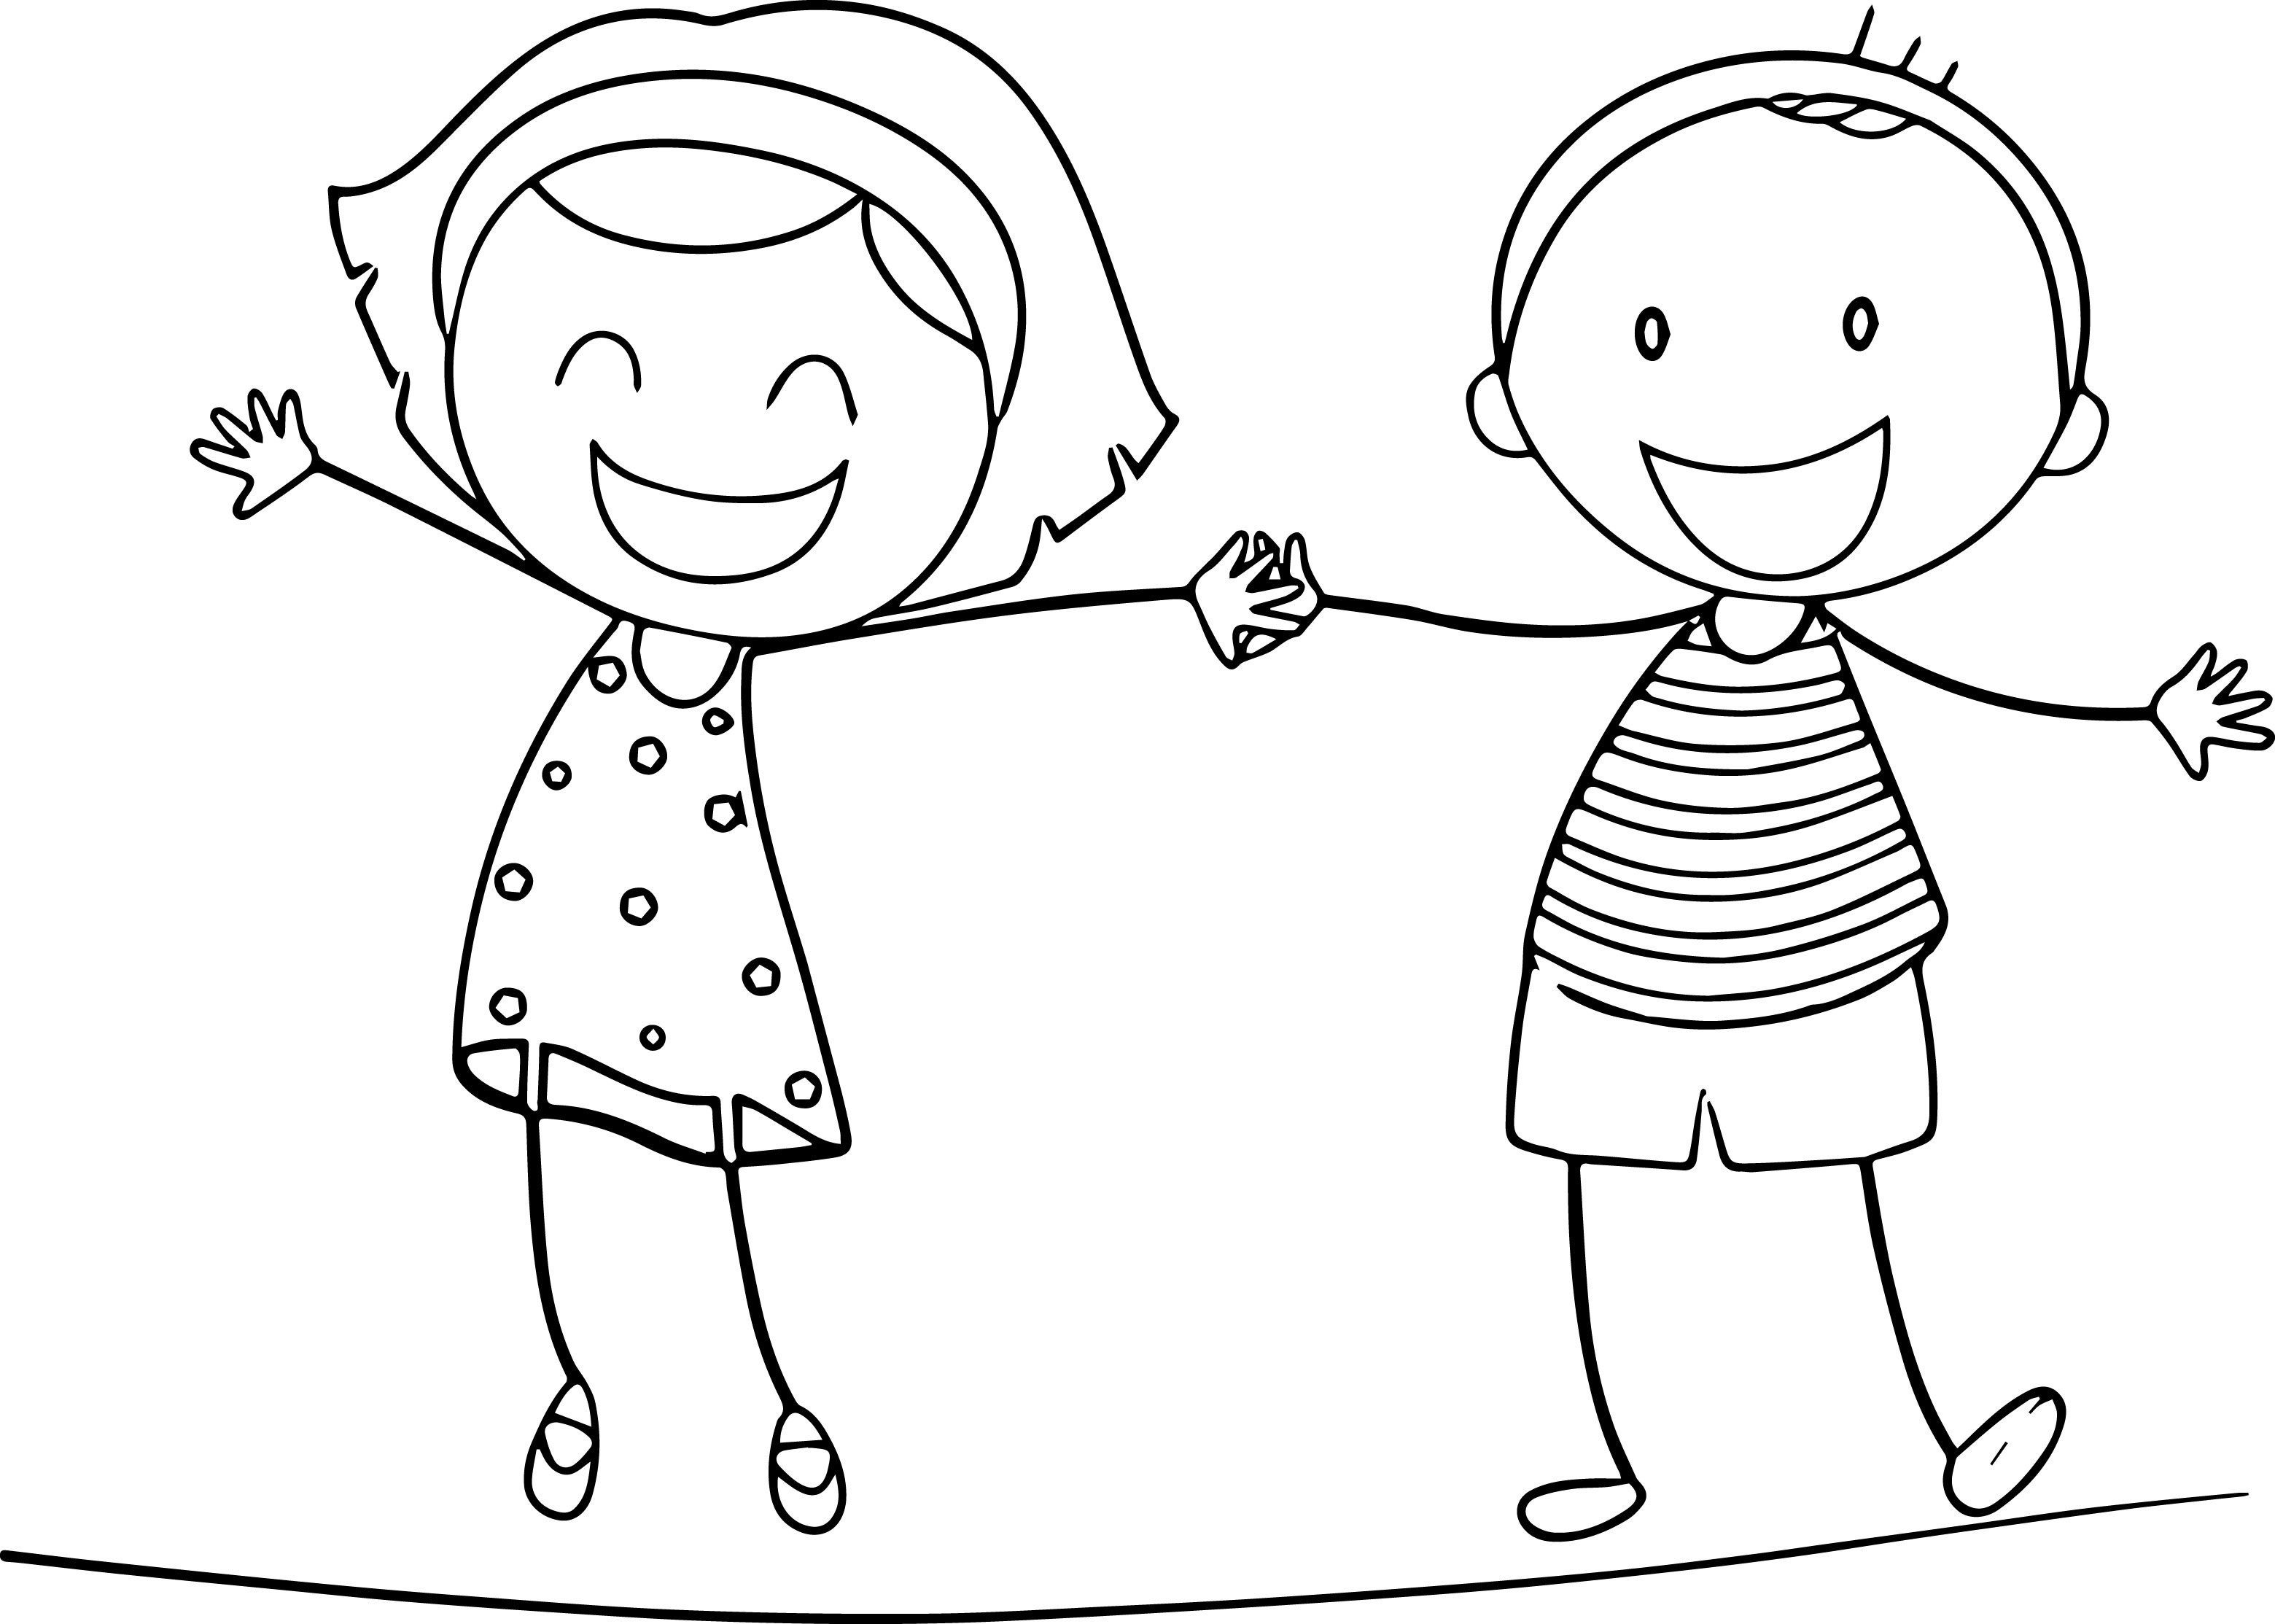 Coloring Sheets For Kids Girls
 Fun Coloring Pages For Boys And Girls The Art Jinni